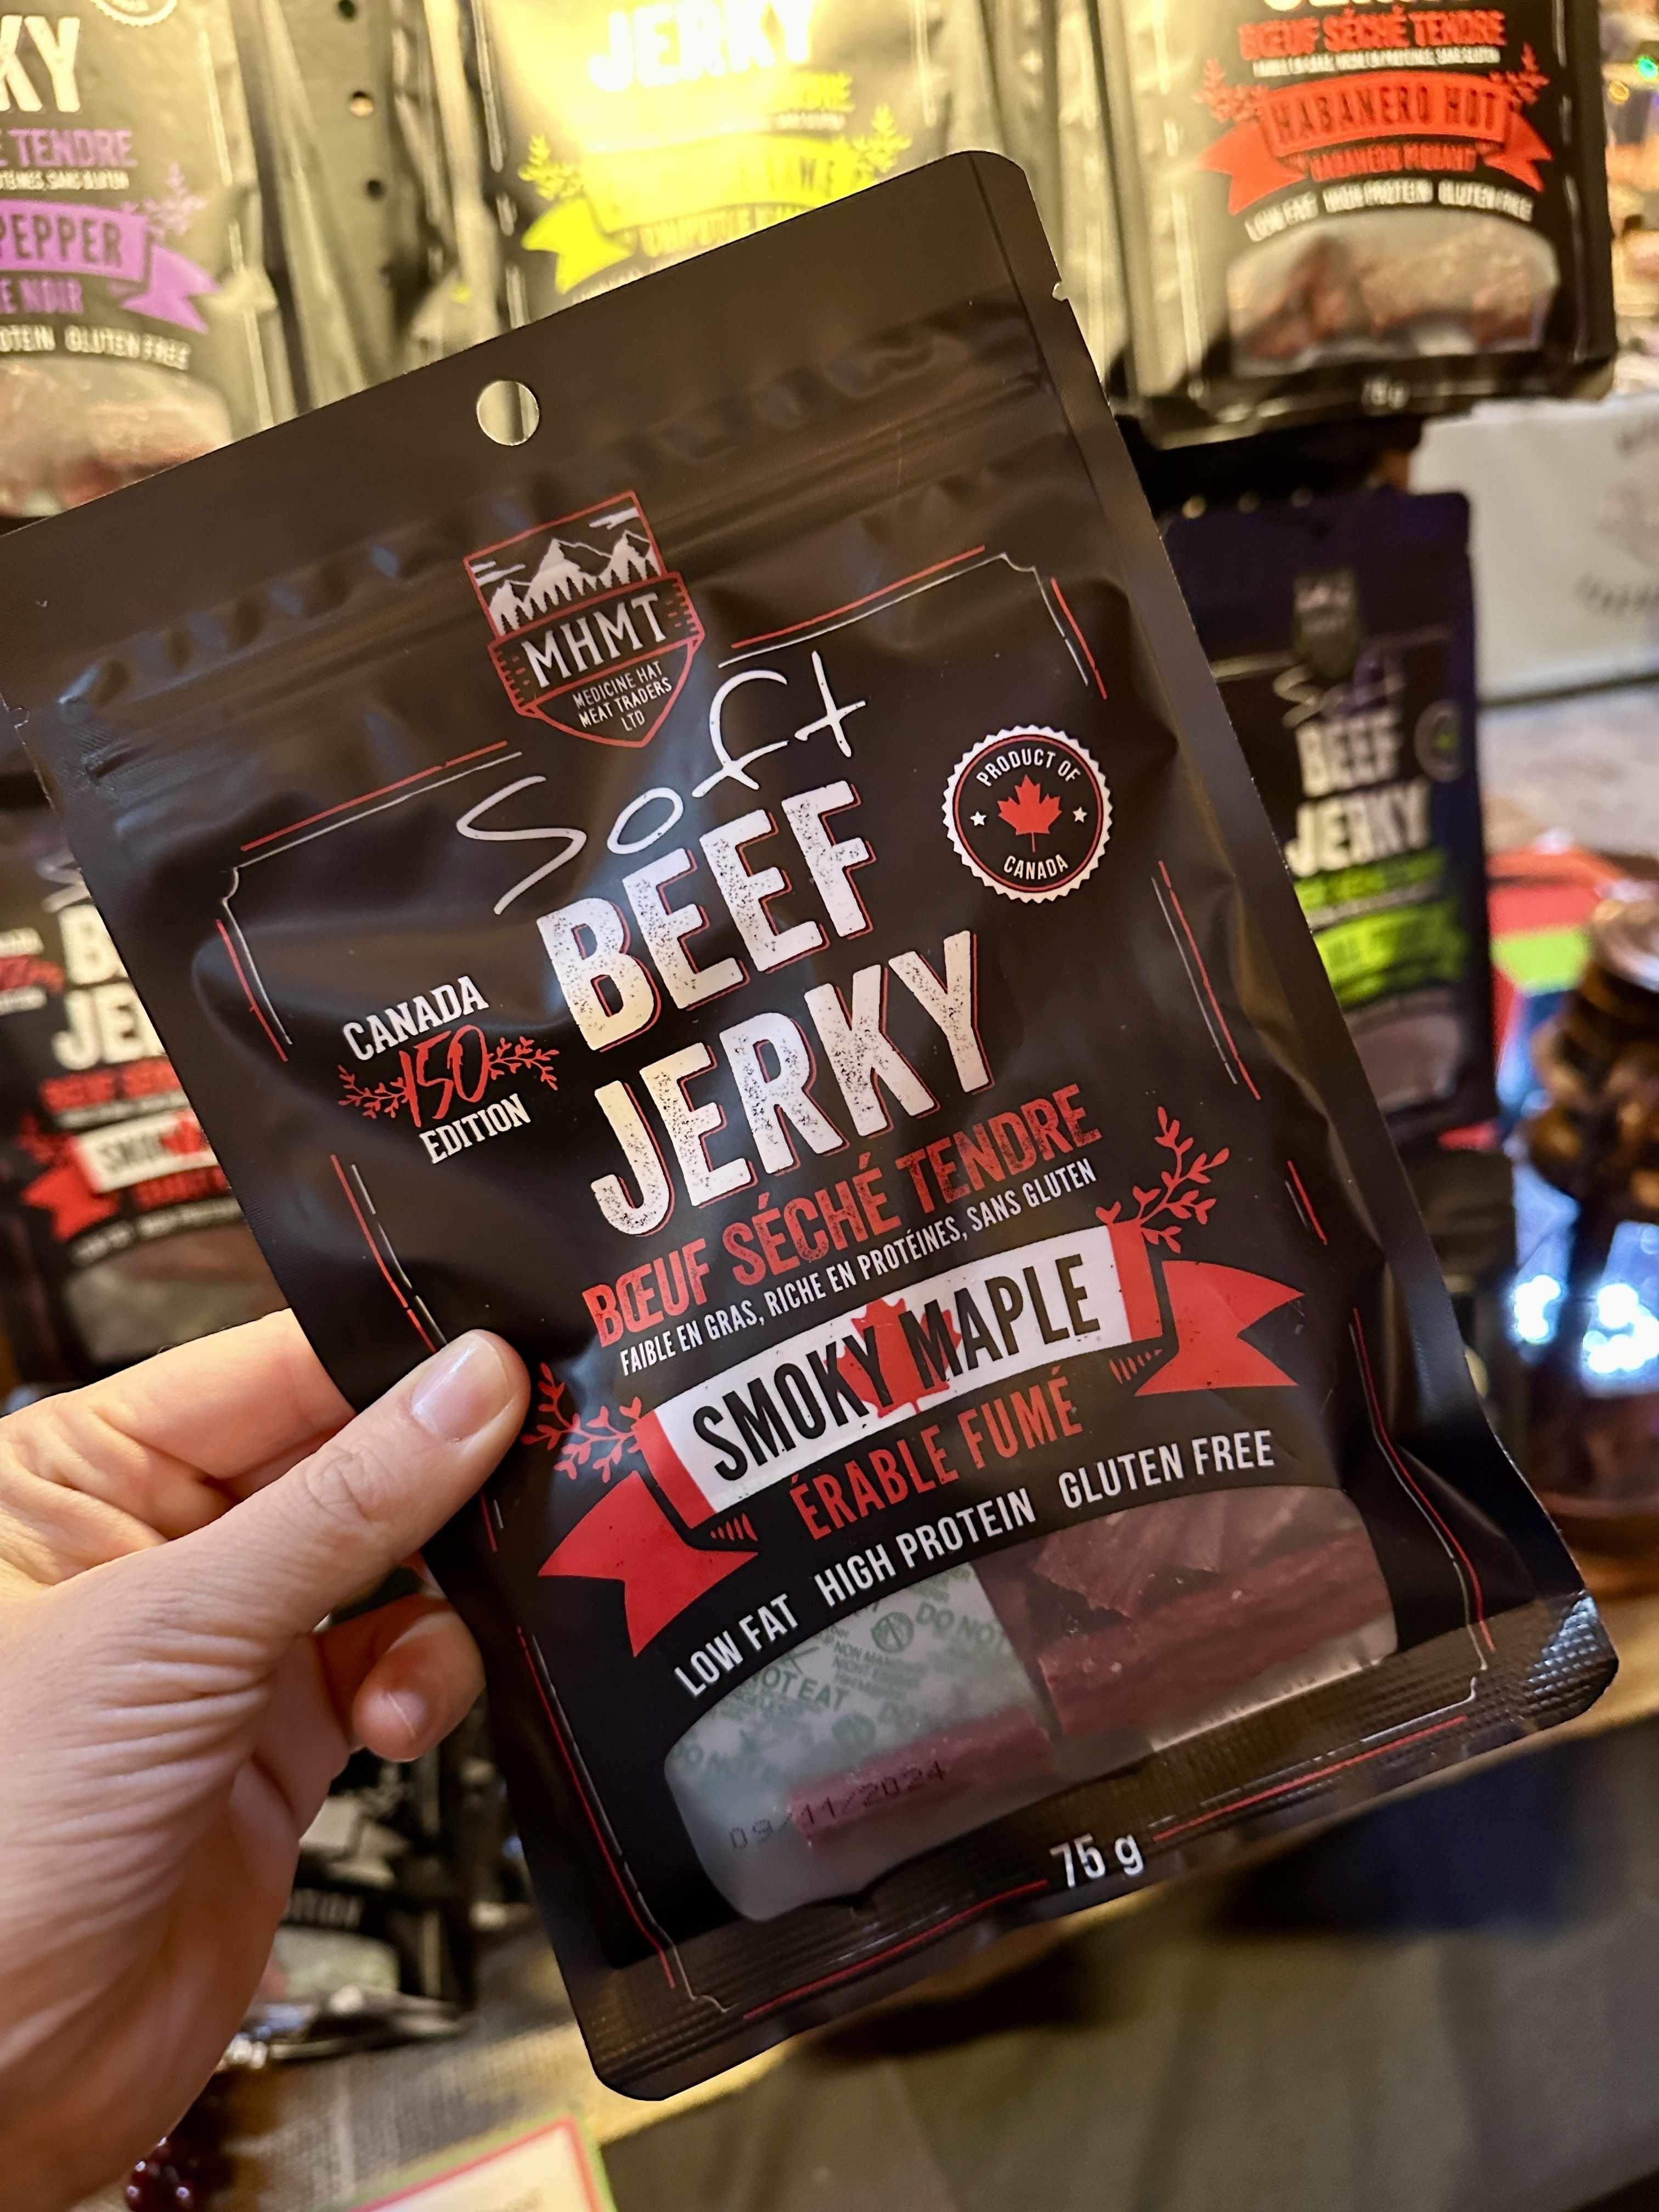 A bag of soft beef jerky